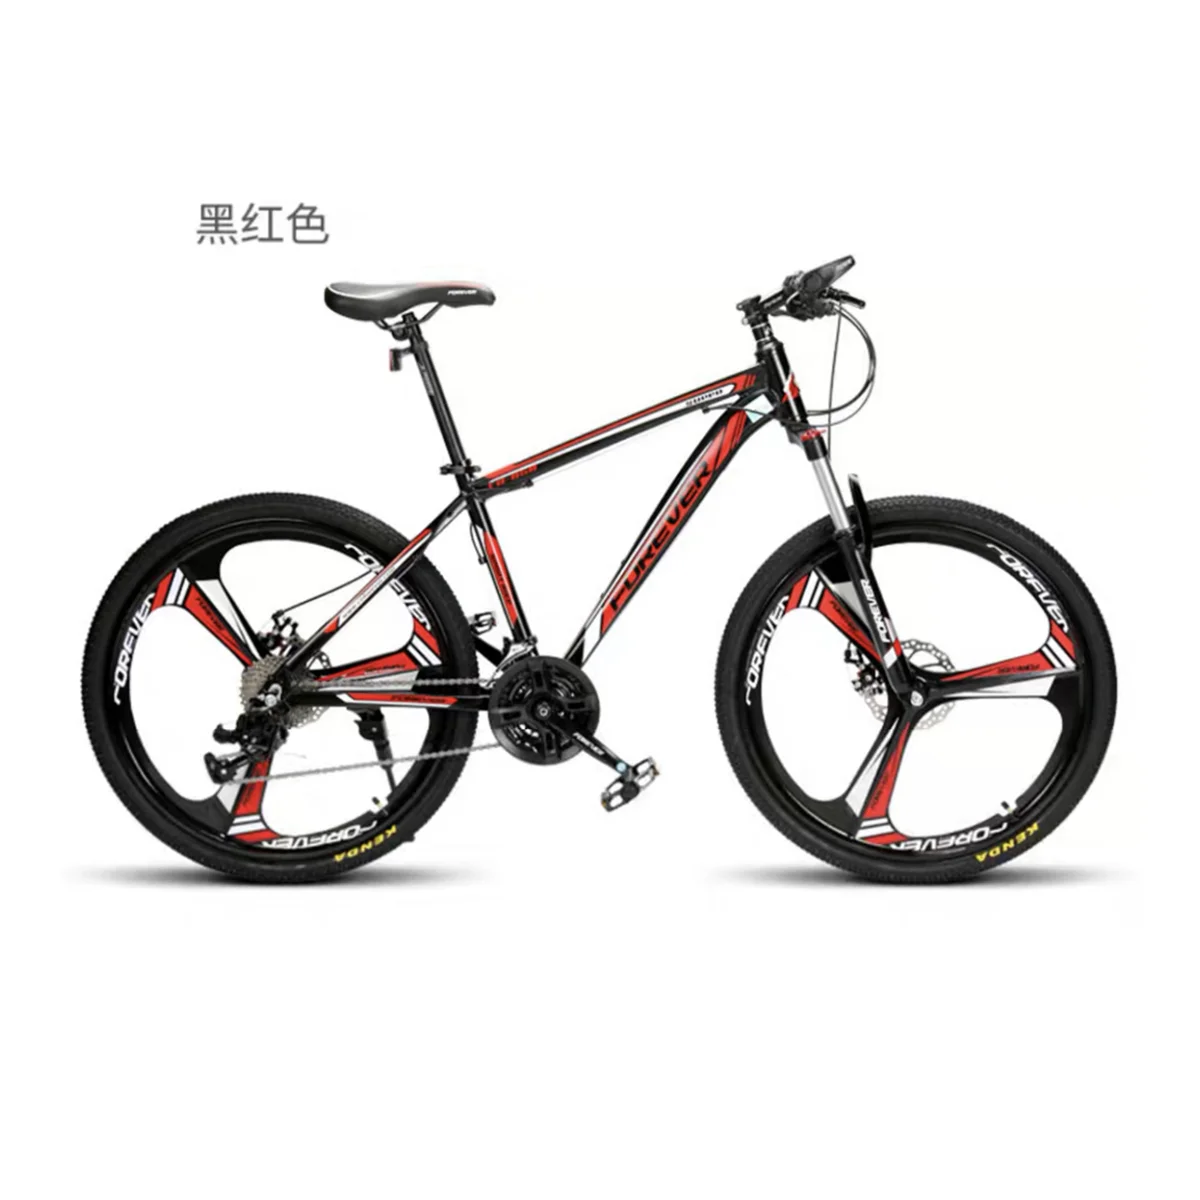 

Tianjin stock adult road bicycle 27.5 inch non folding carbon steel alloy 27 speed mountain bike, Requirements